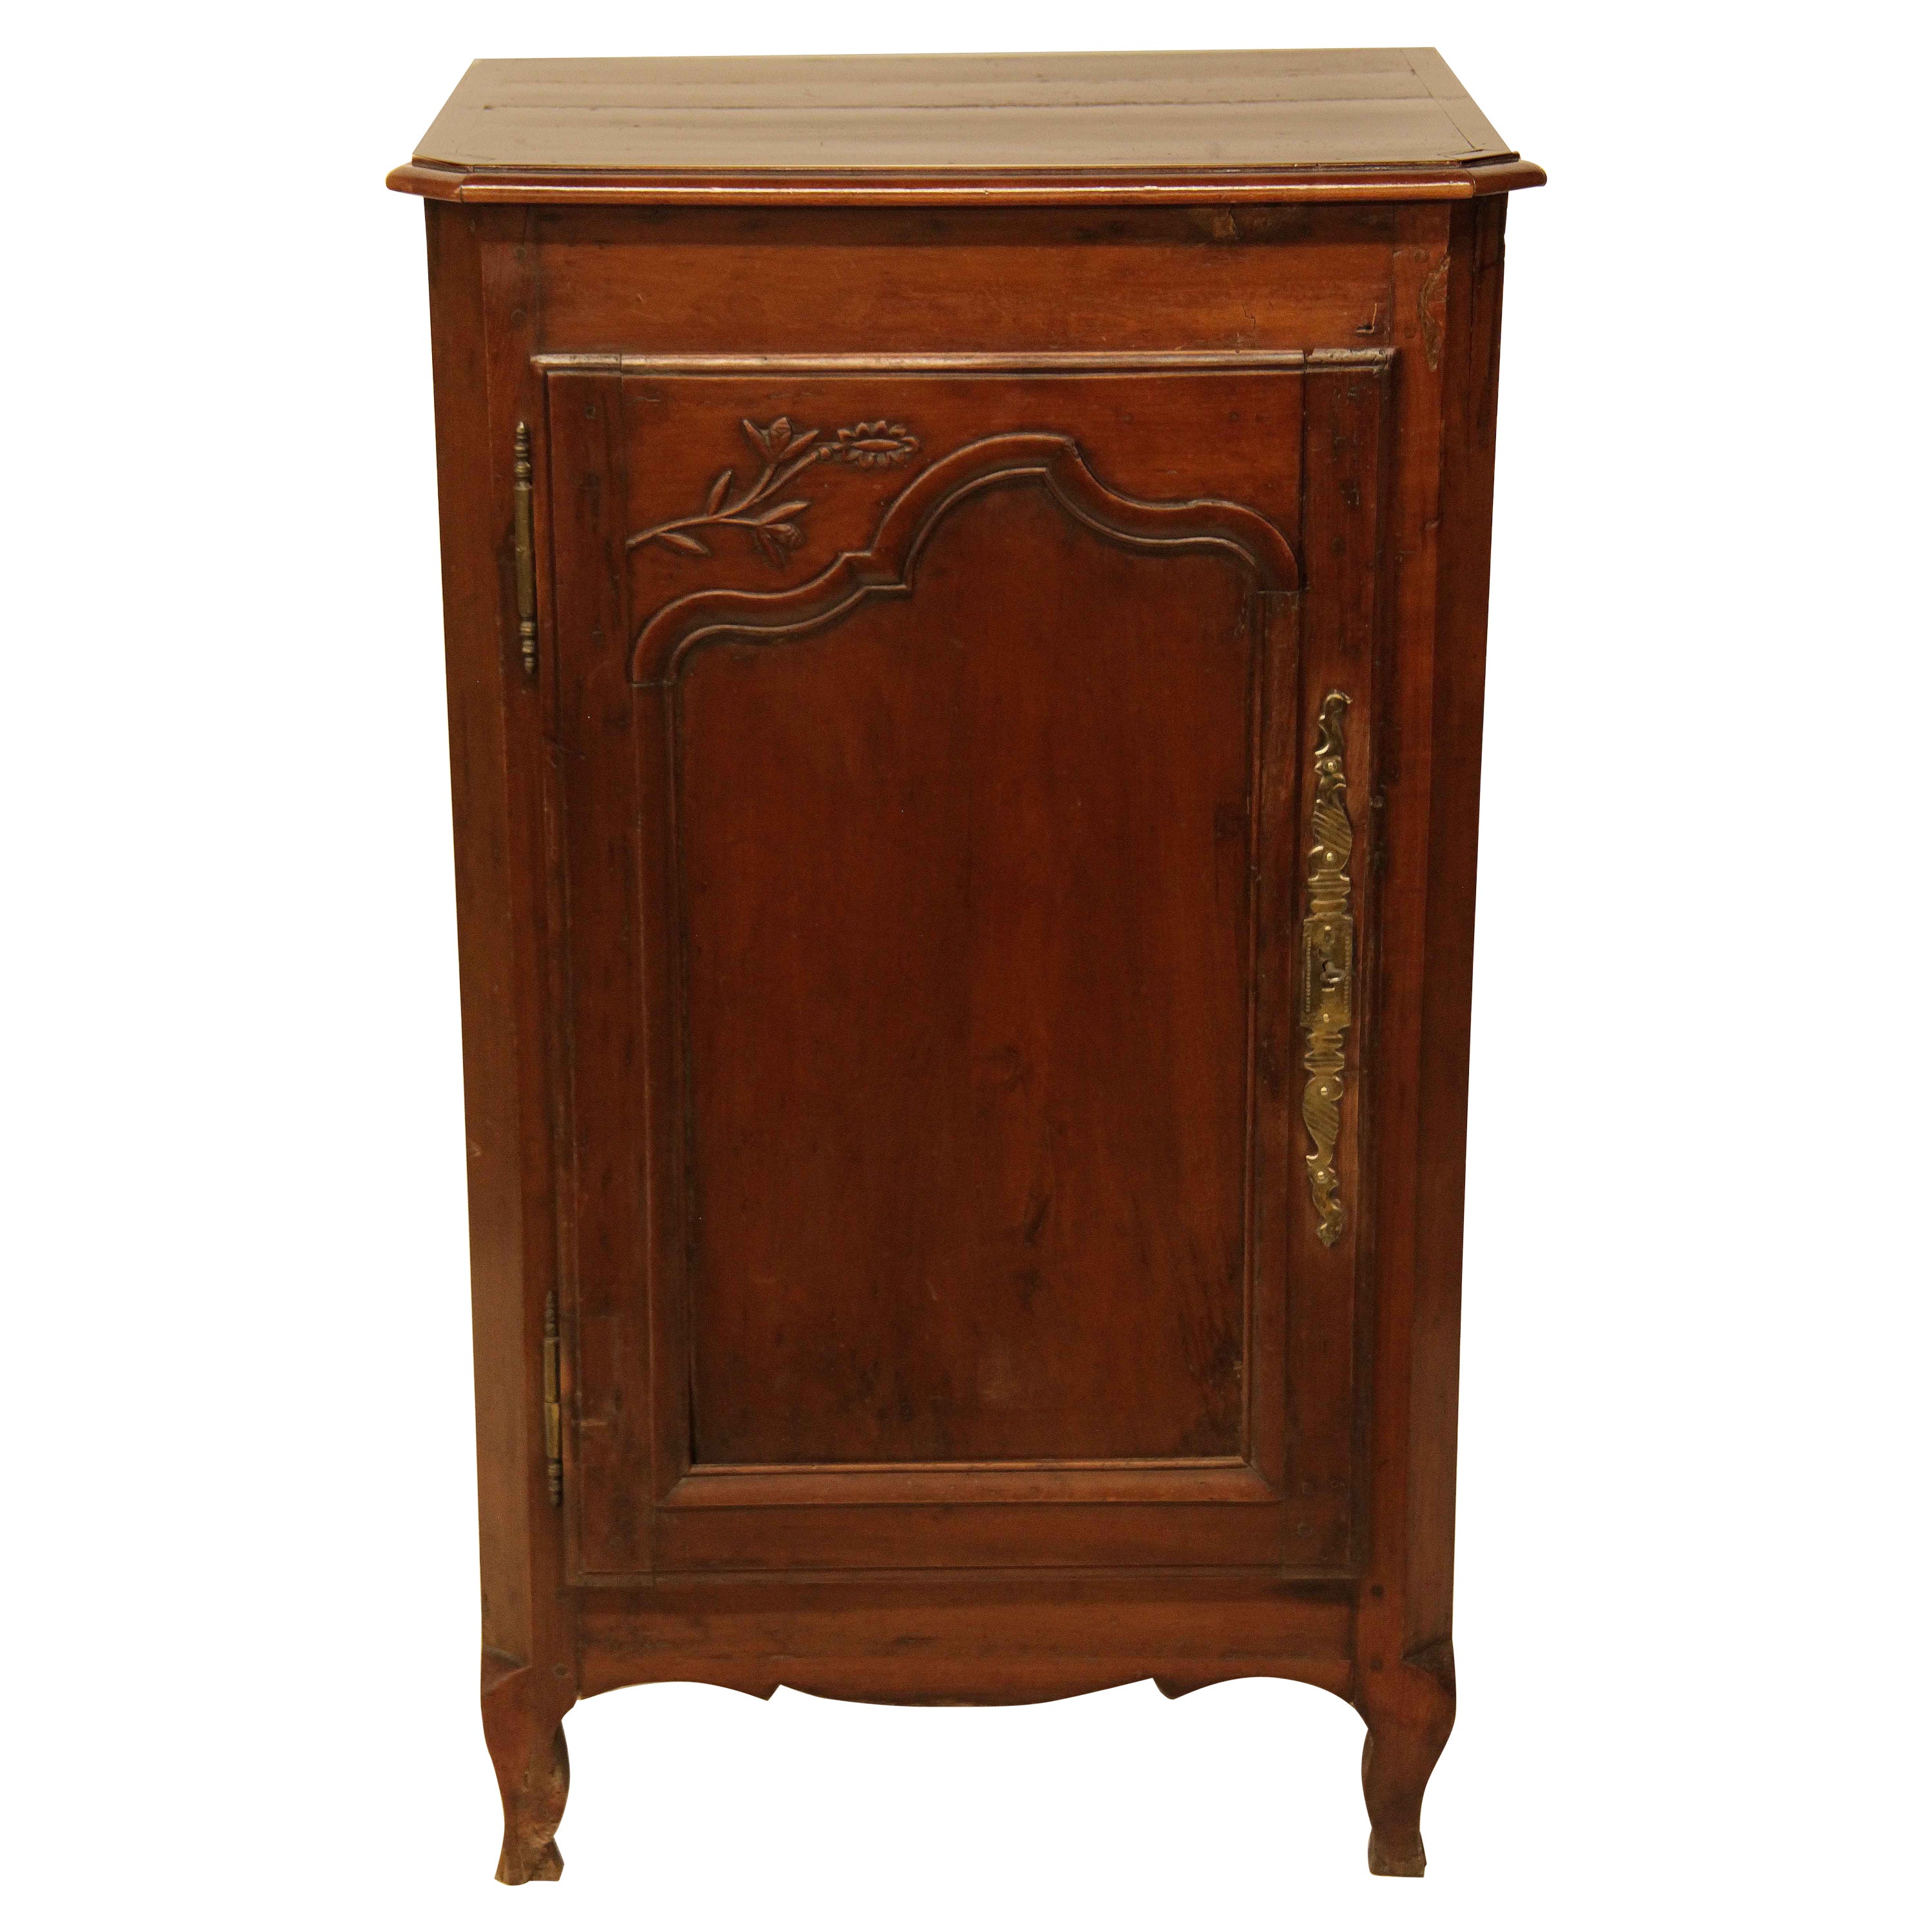 French Cherry Cabinet